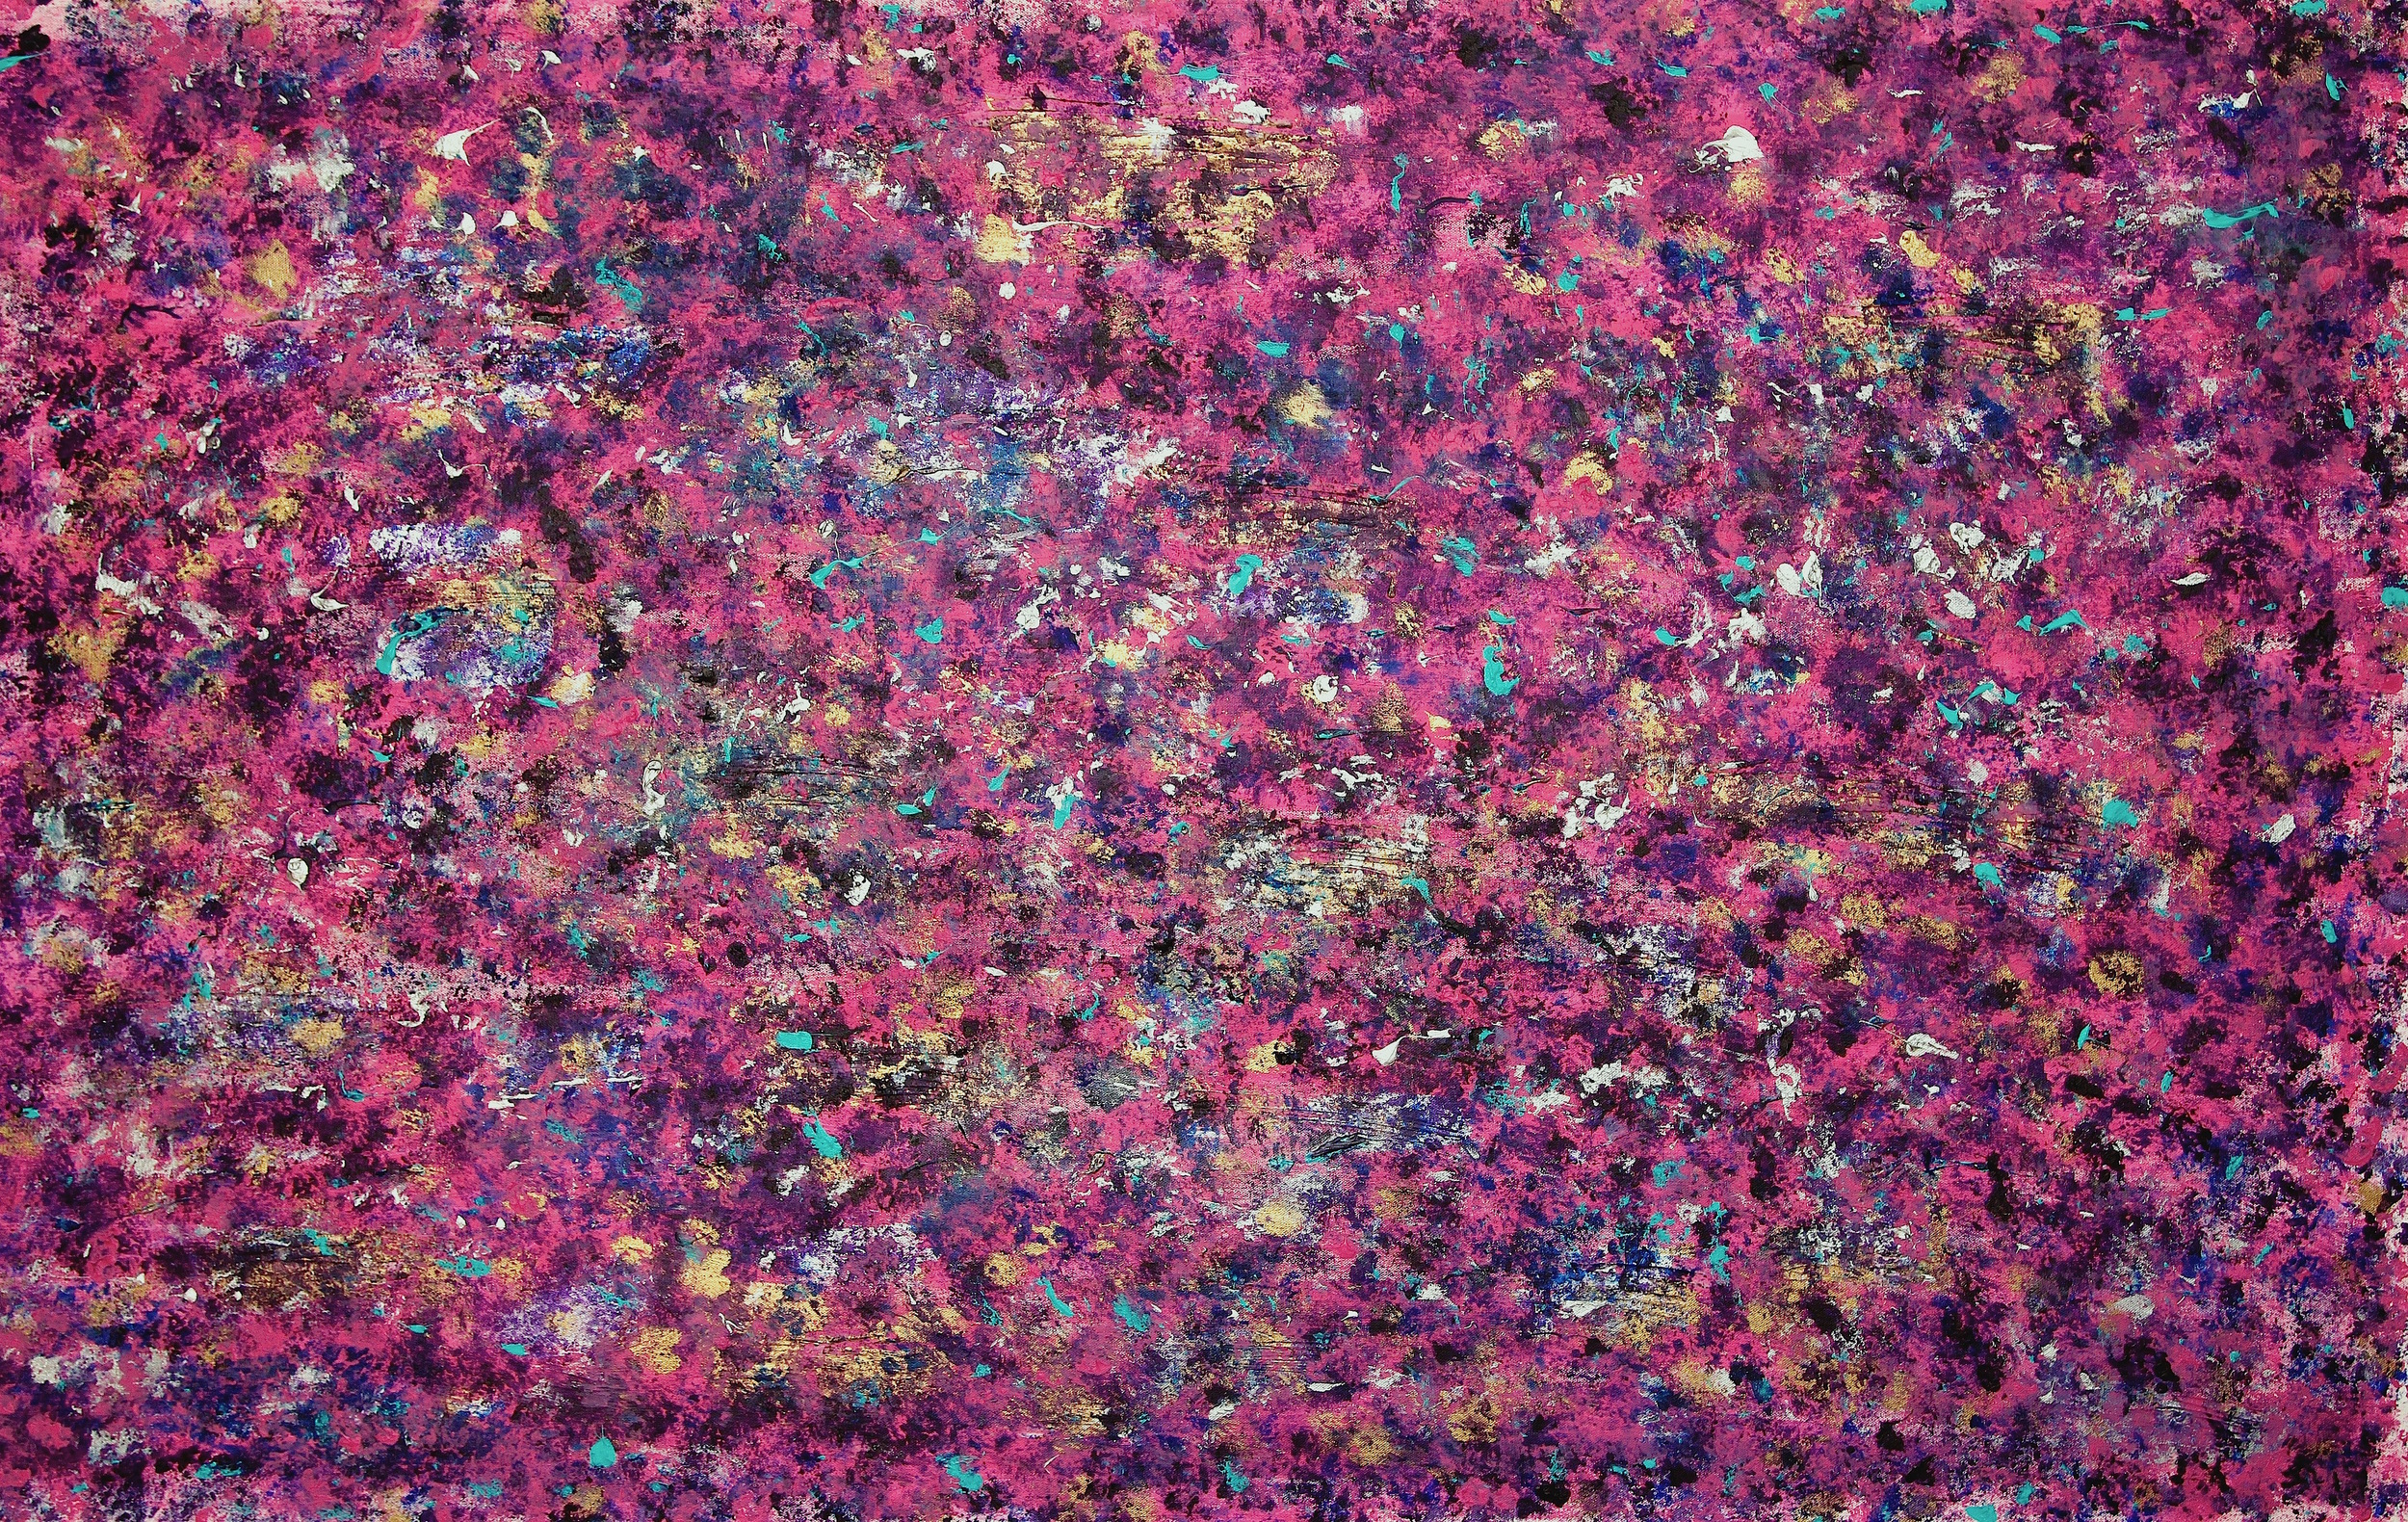   Pink Coral    Acrylic on Canvas    36 x 60 x 1.5 in.  